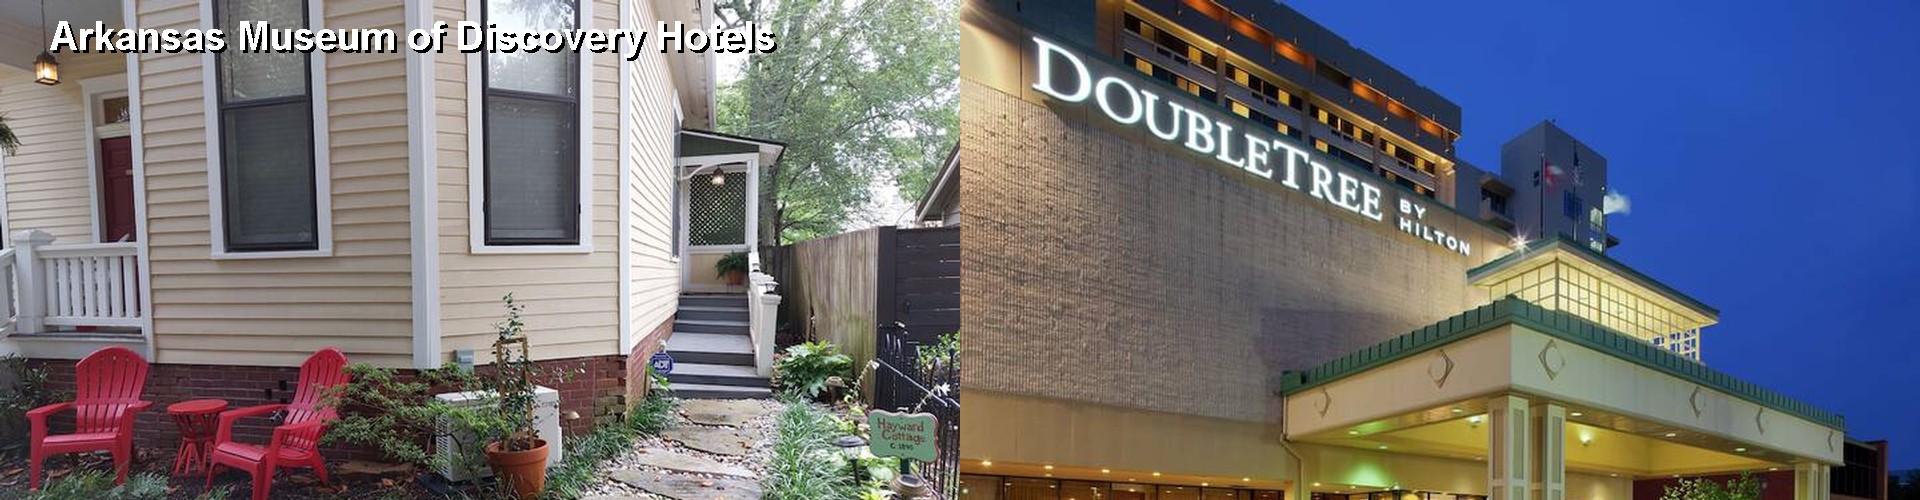 5 Best Hotels near Arkansas Museum of Discovery